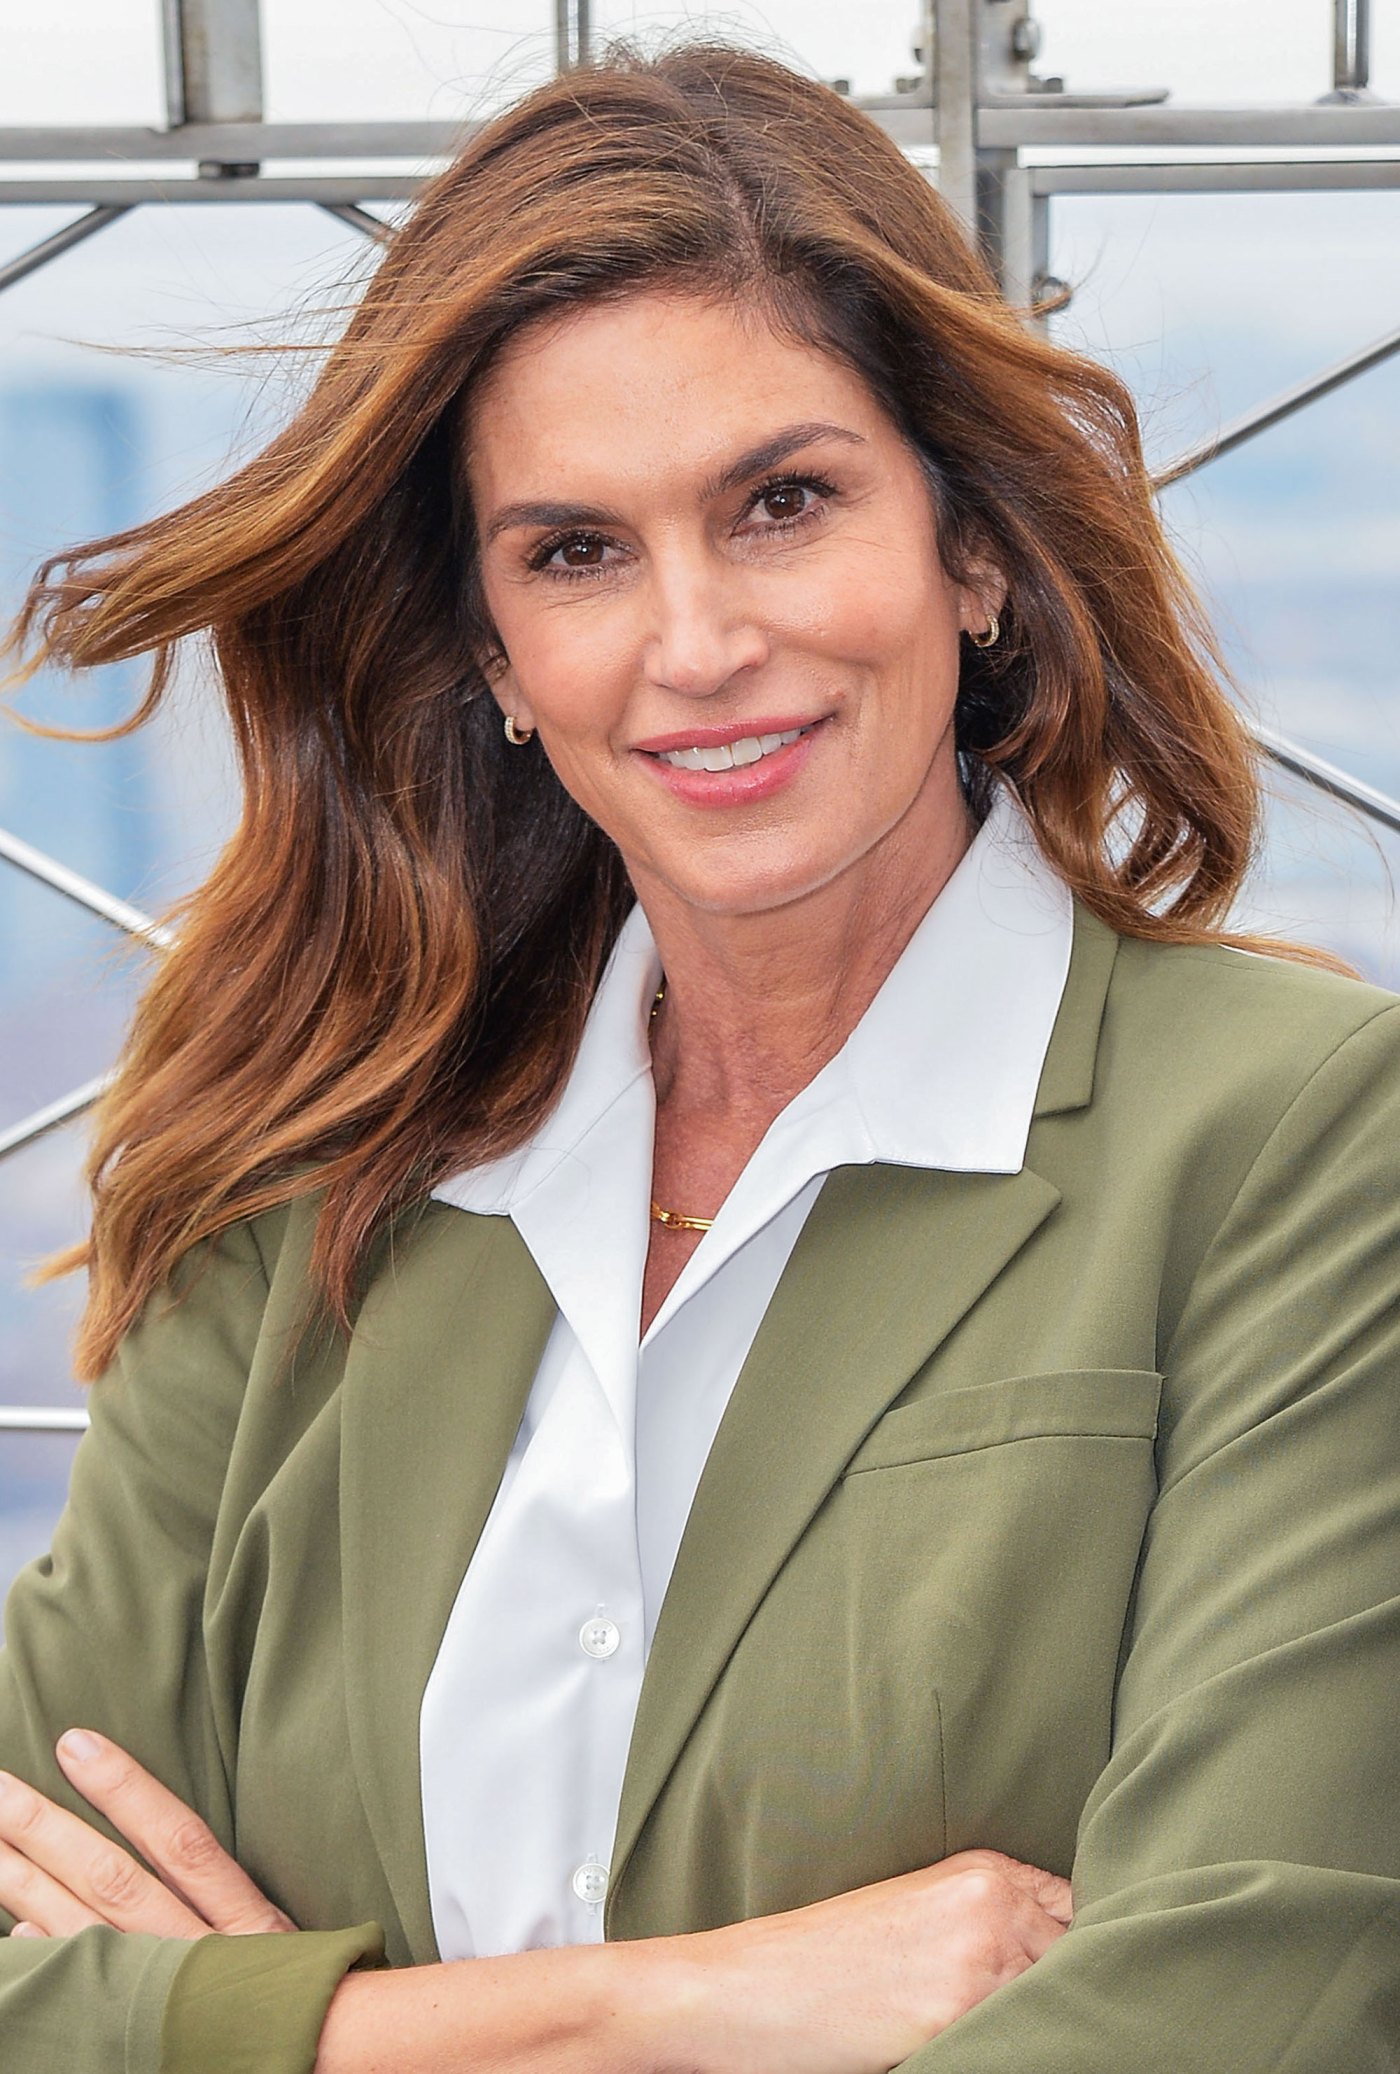 Cindy Crawford Talks About Growing Up With Her Beauty Mark 5649